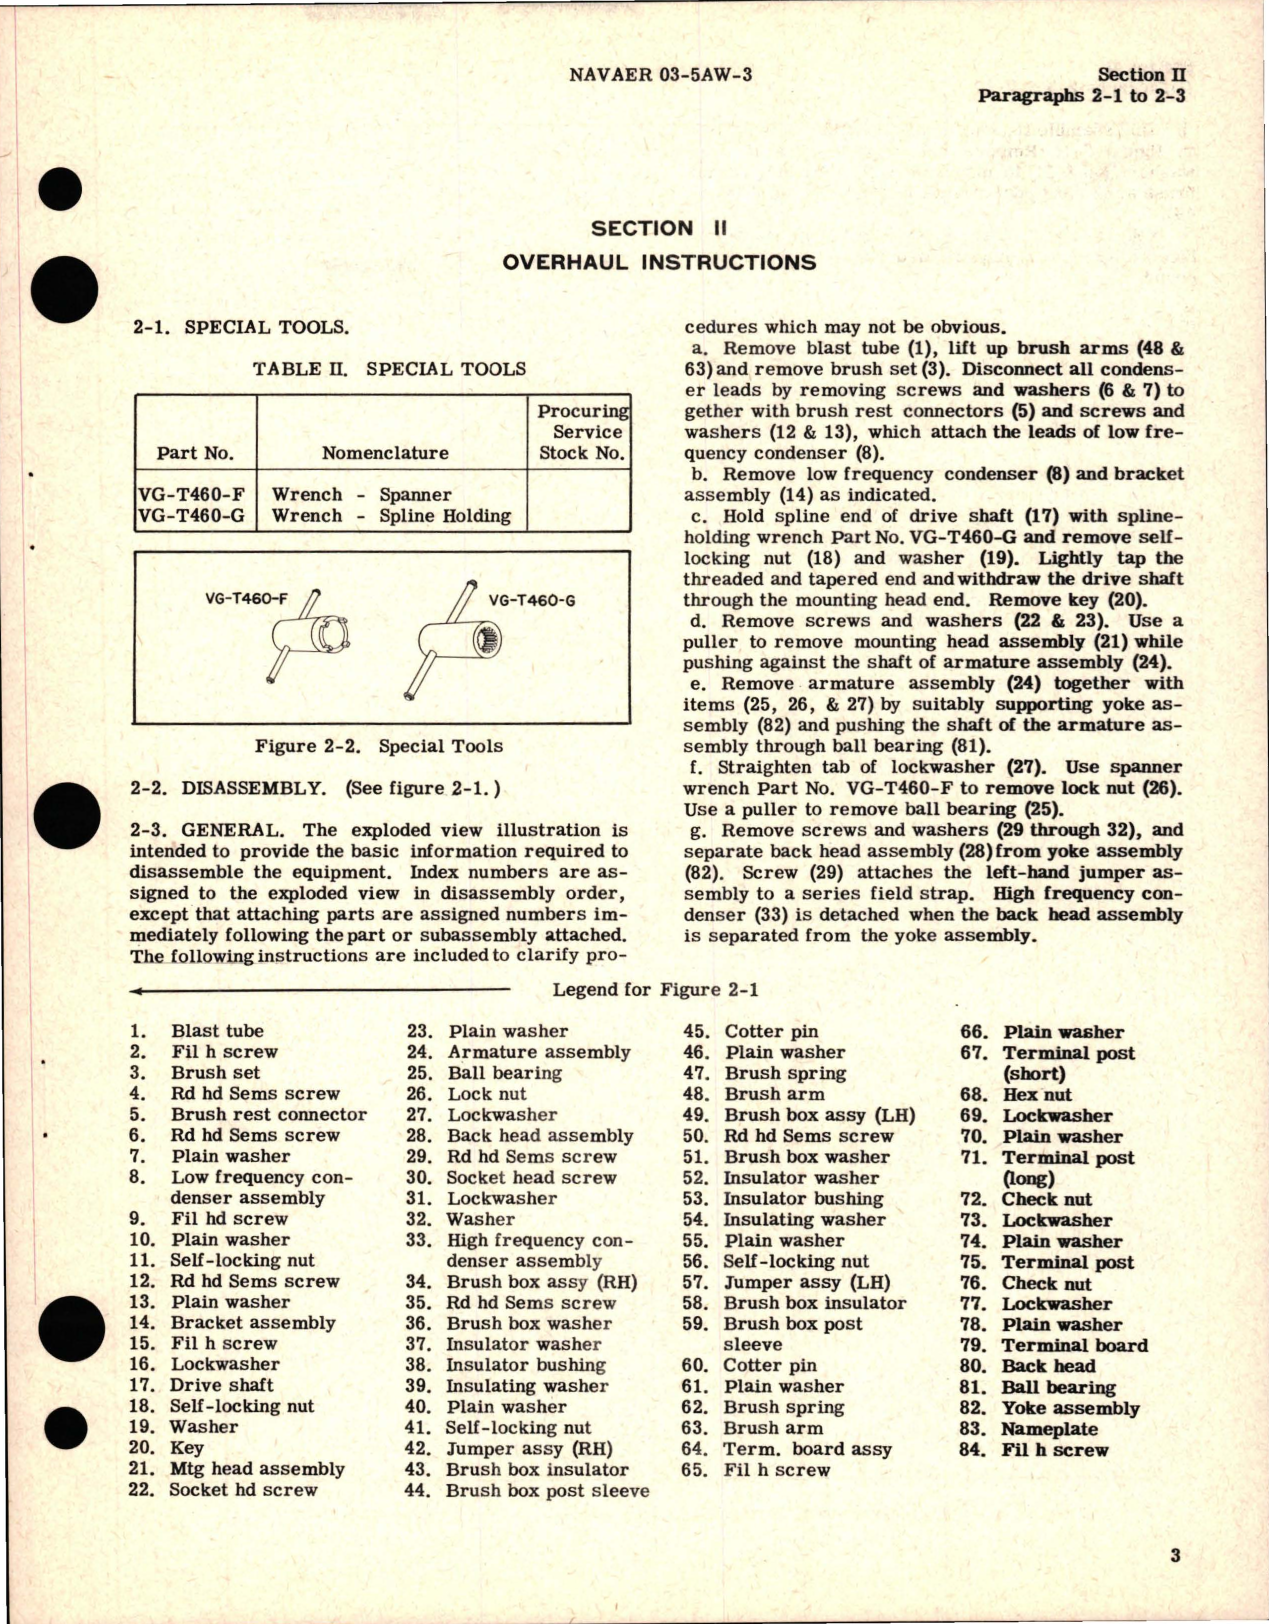 Sample page 7 from AirCorps Library document: Overhaul Instructions for Starter Generator - Parts VG-609, VG-609-11 - Types V30-25-A, V30-25-C